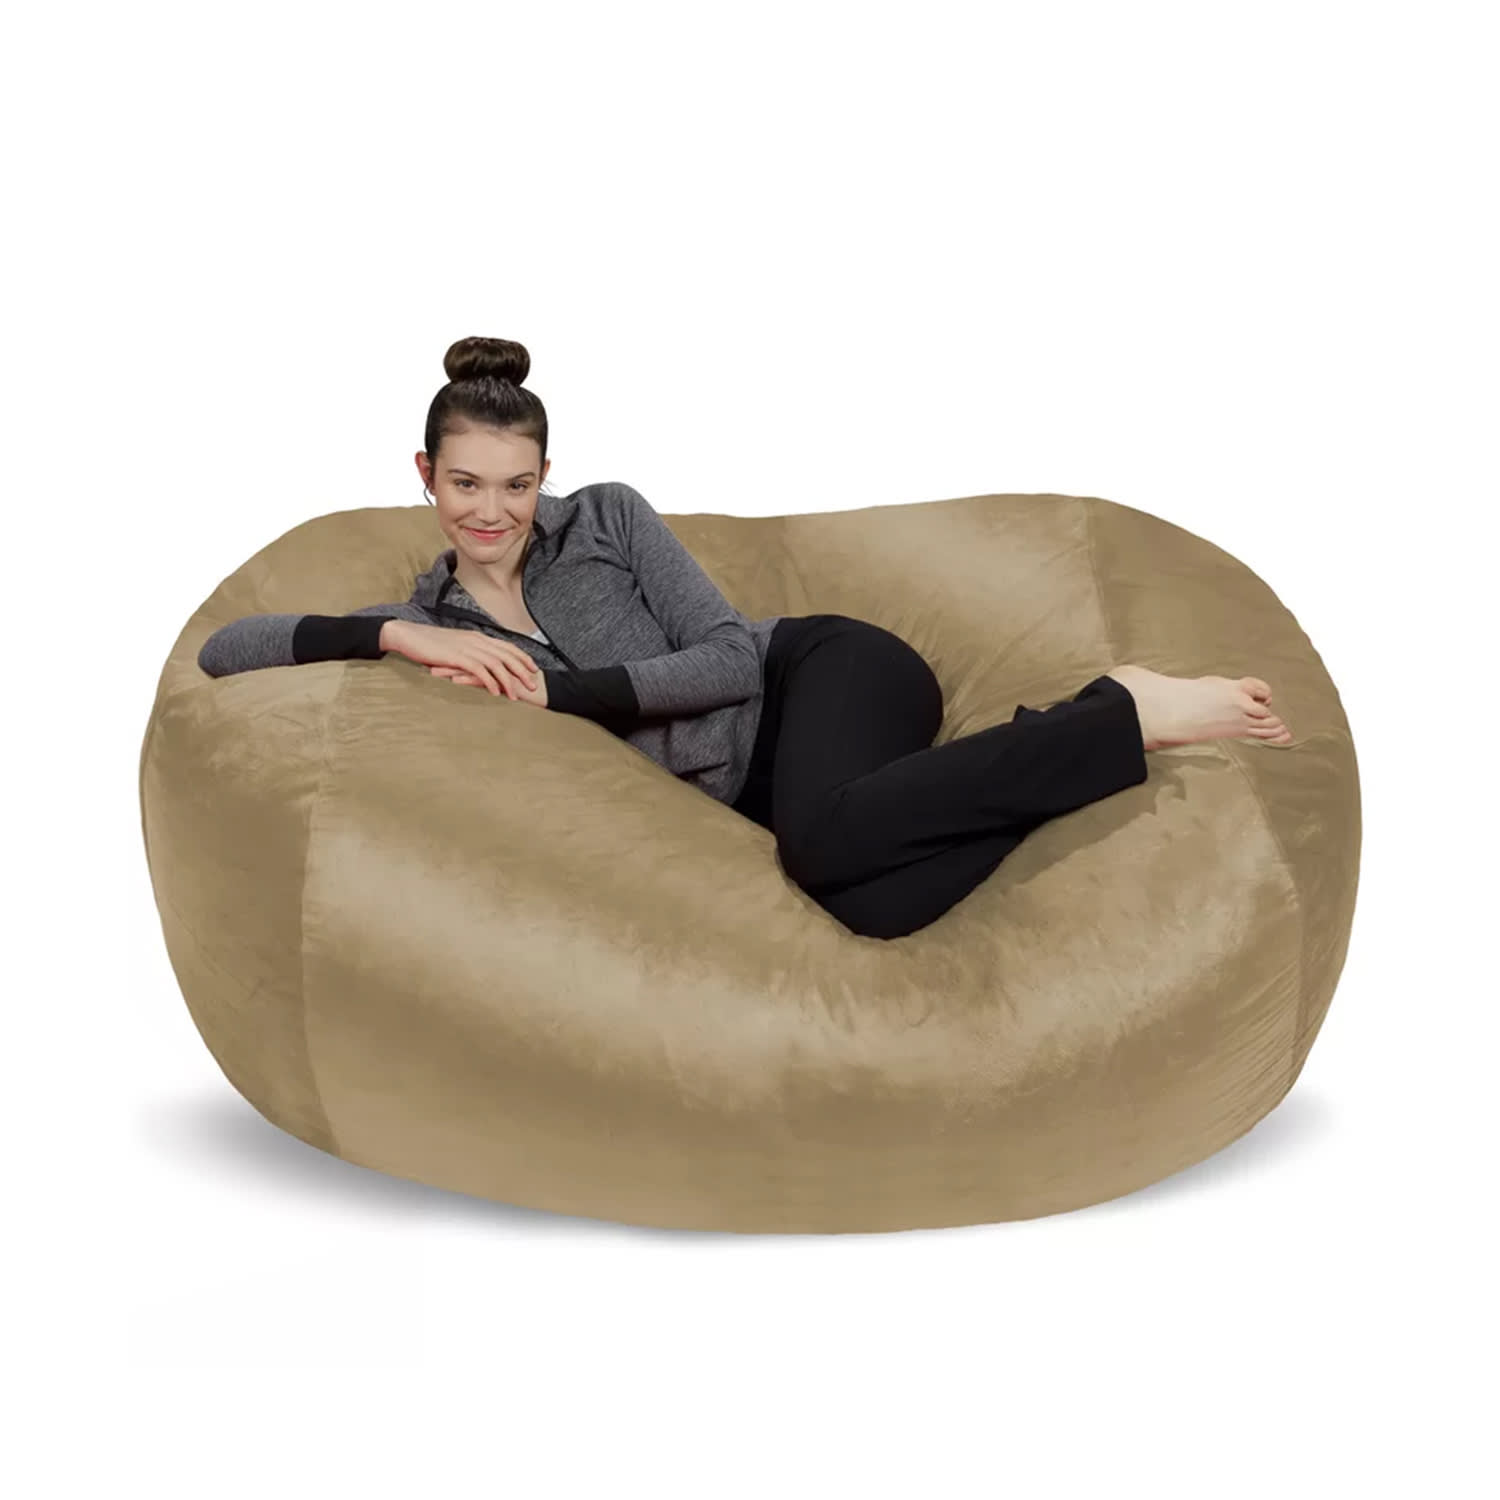 The 10 Best Bean Bag Chairs of 2023